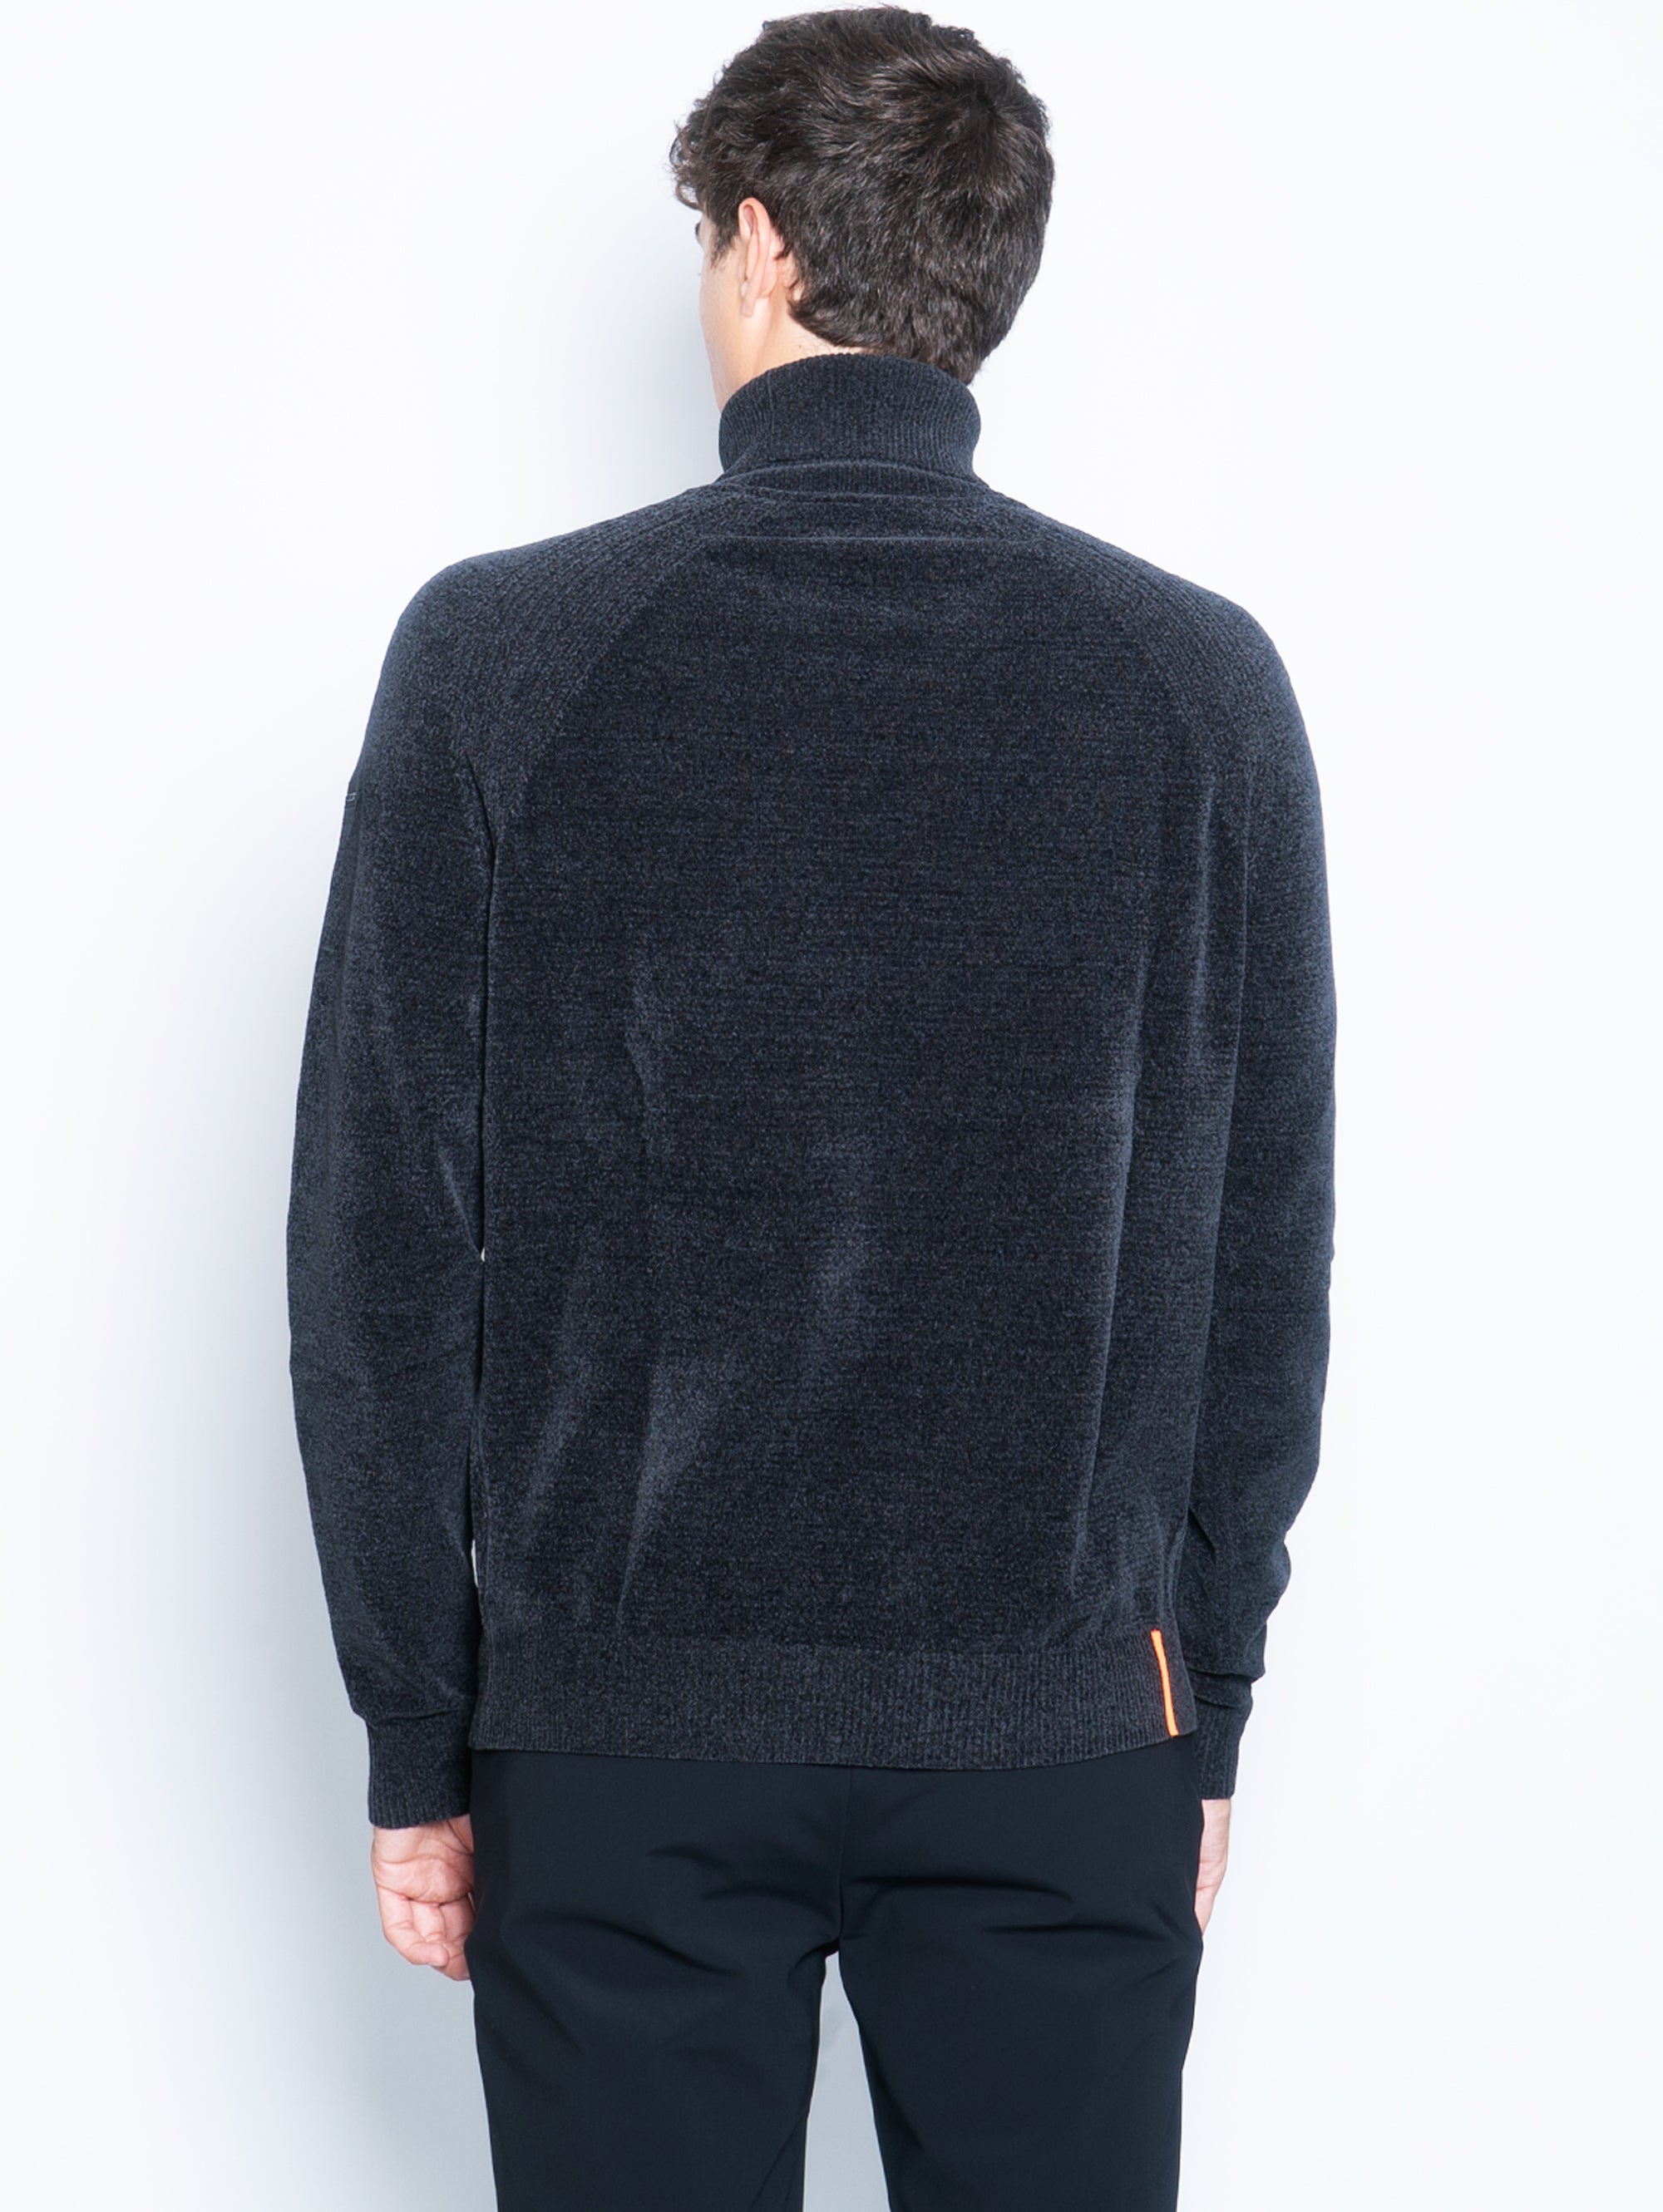 High-neck sweater in lead chenille